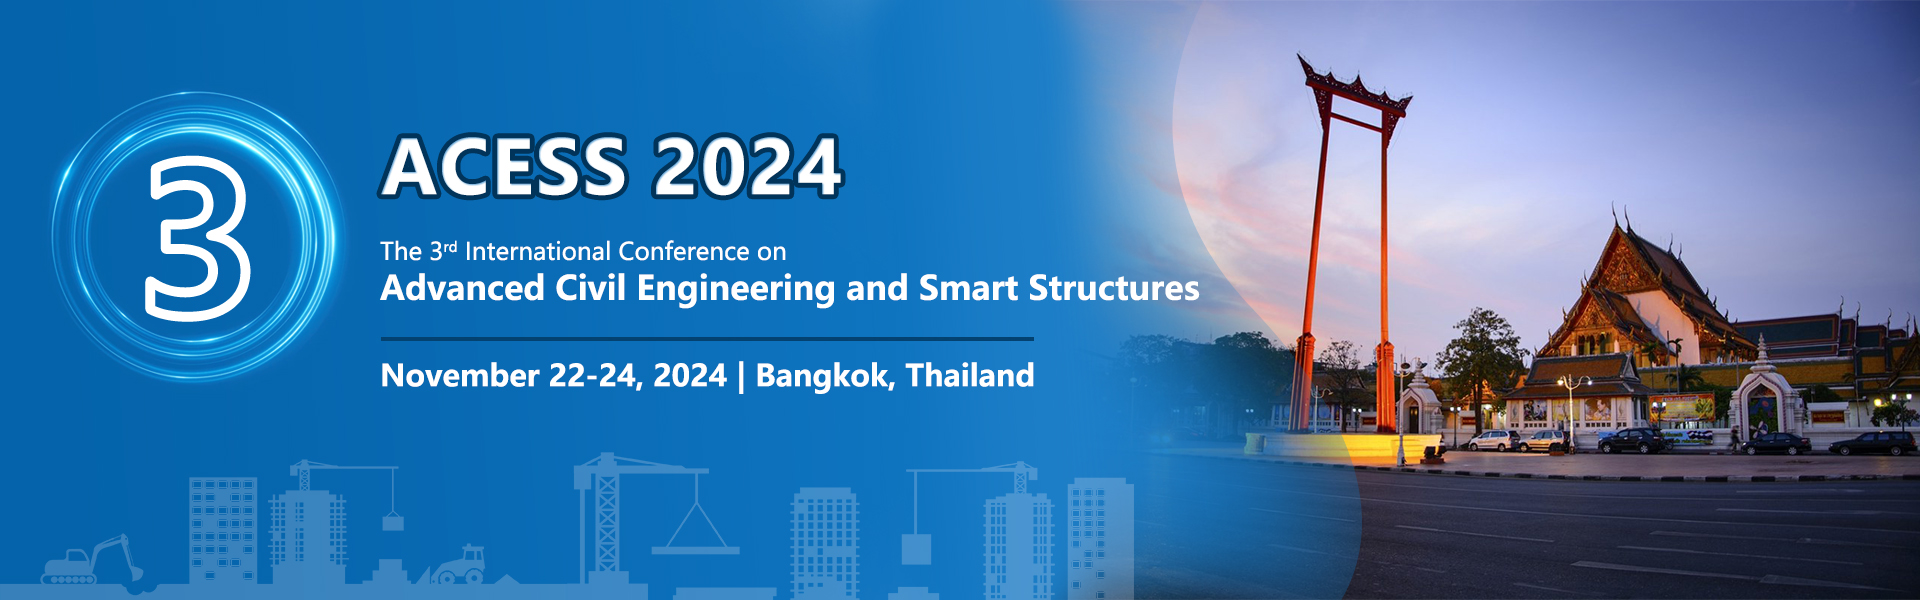 The 3rd International Conference on  Advanced Civil Engineering and Smart Structures